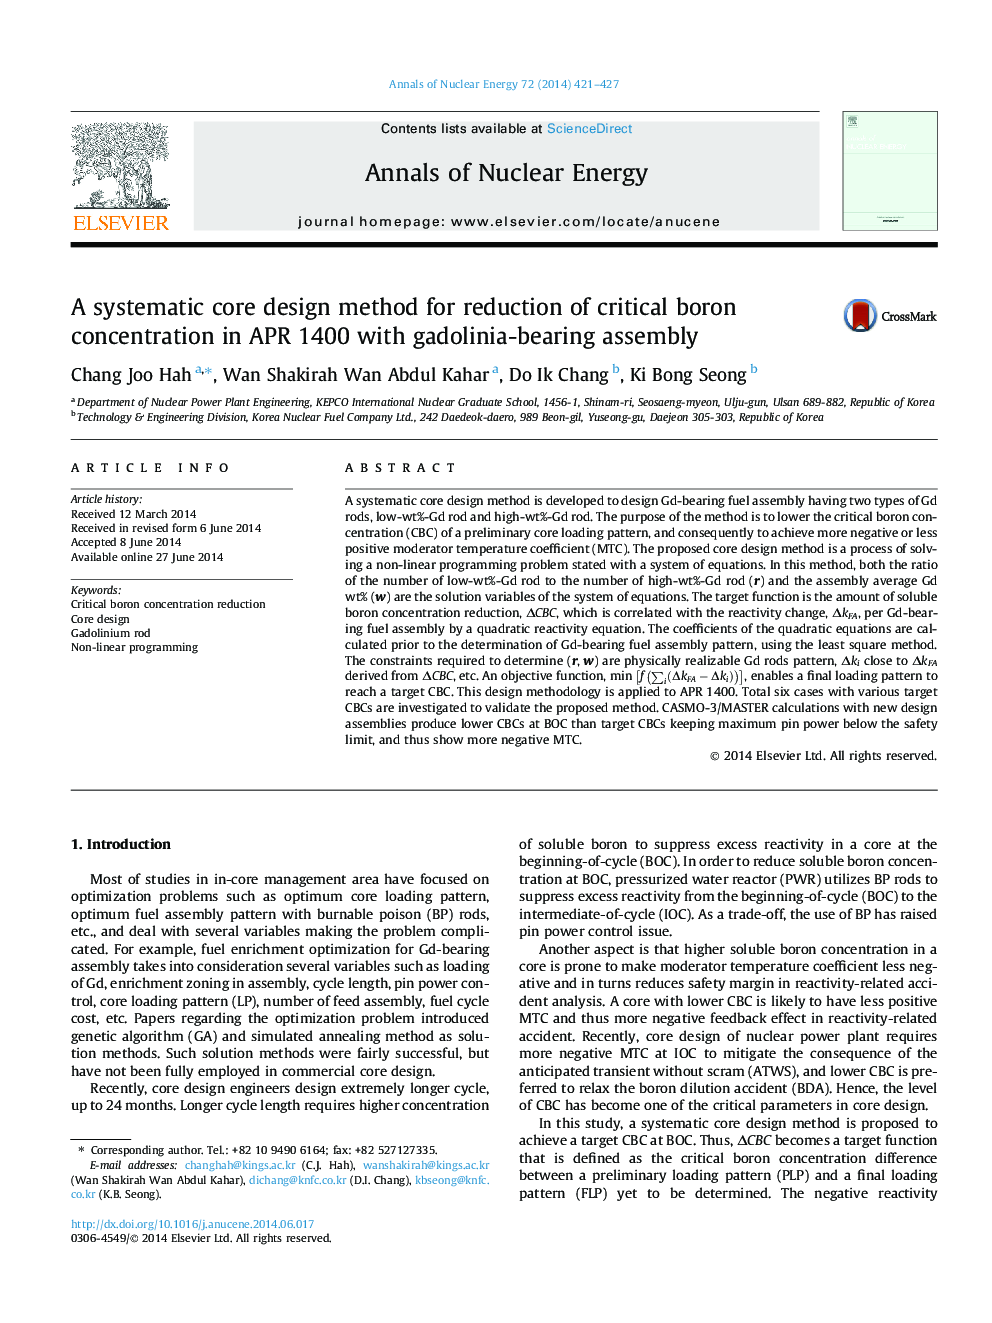 A systematic core design method for reduction of critical boron concentration in APR 1400 with gadolinia-bearing assembly